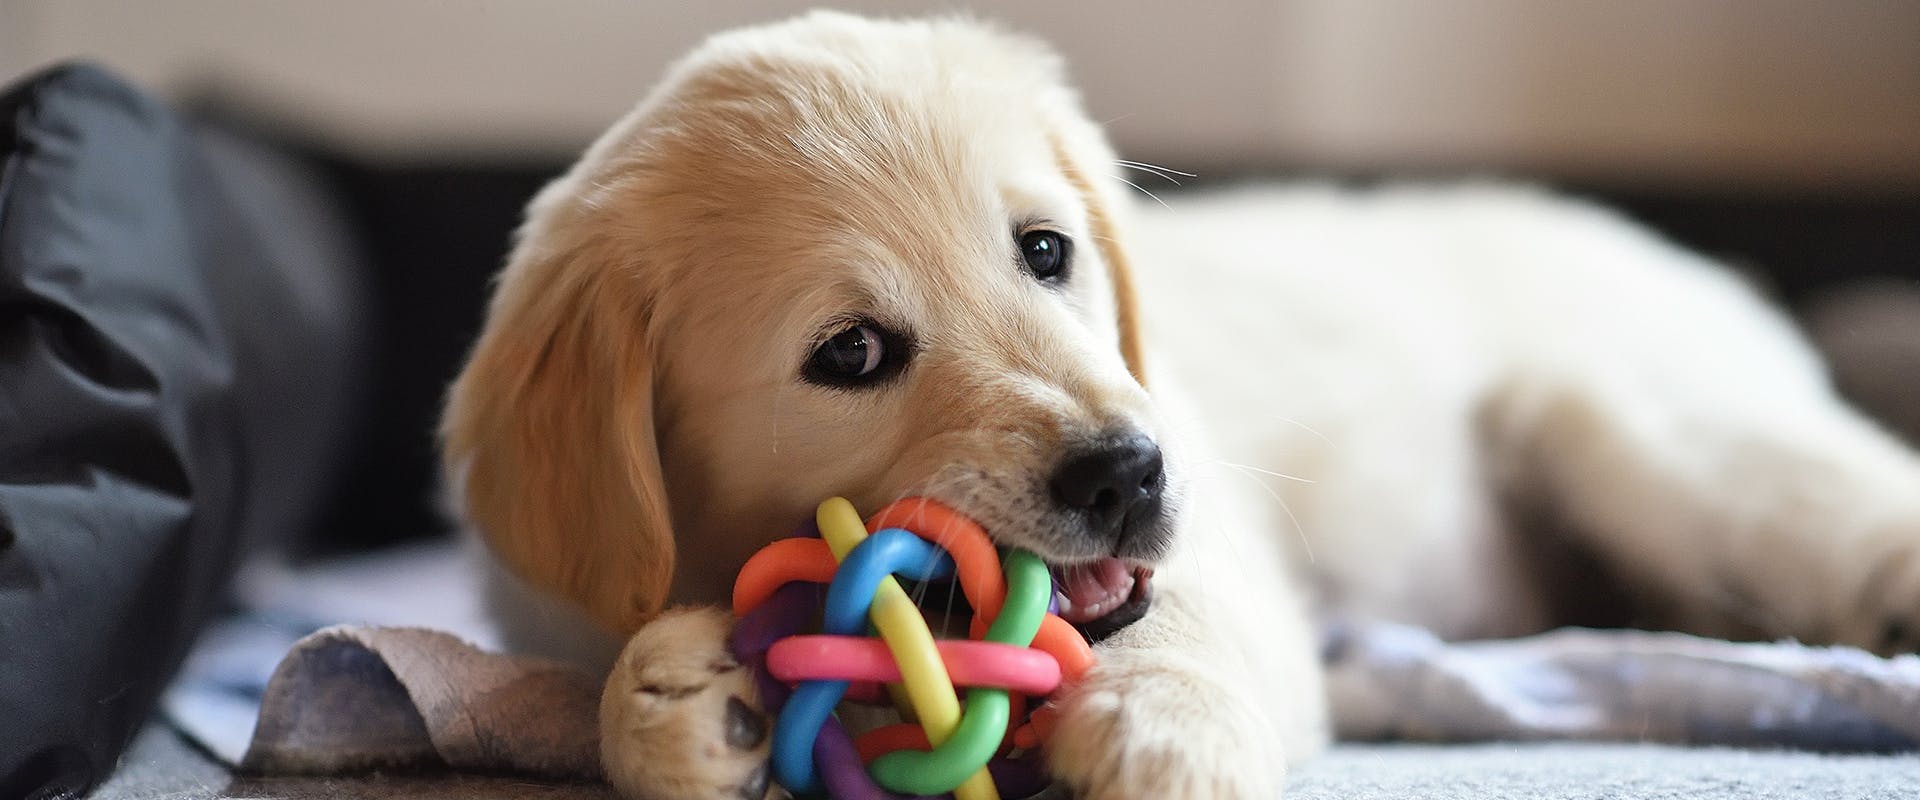 A small Golden Retriever puppy chewing on a chew toy